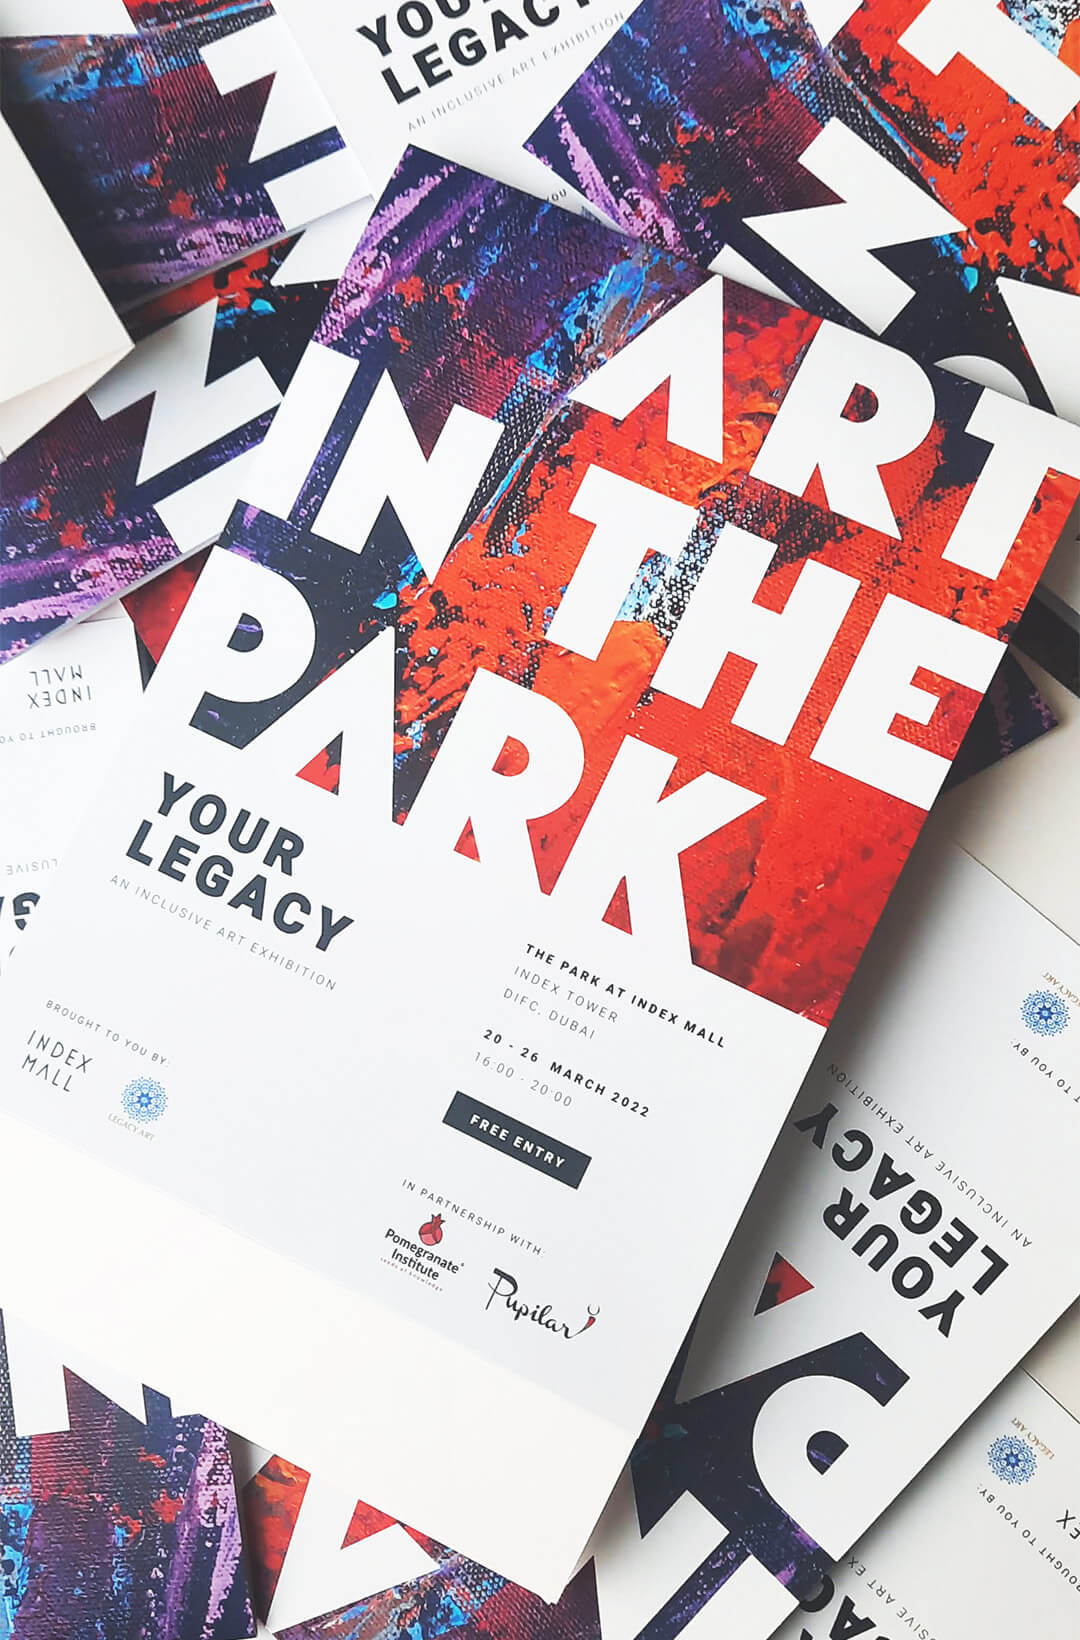 art in the park design solutions